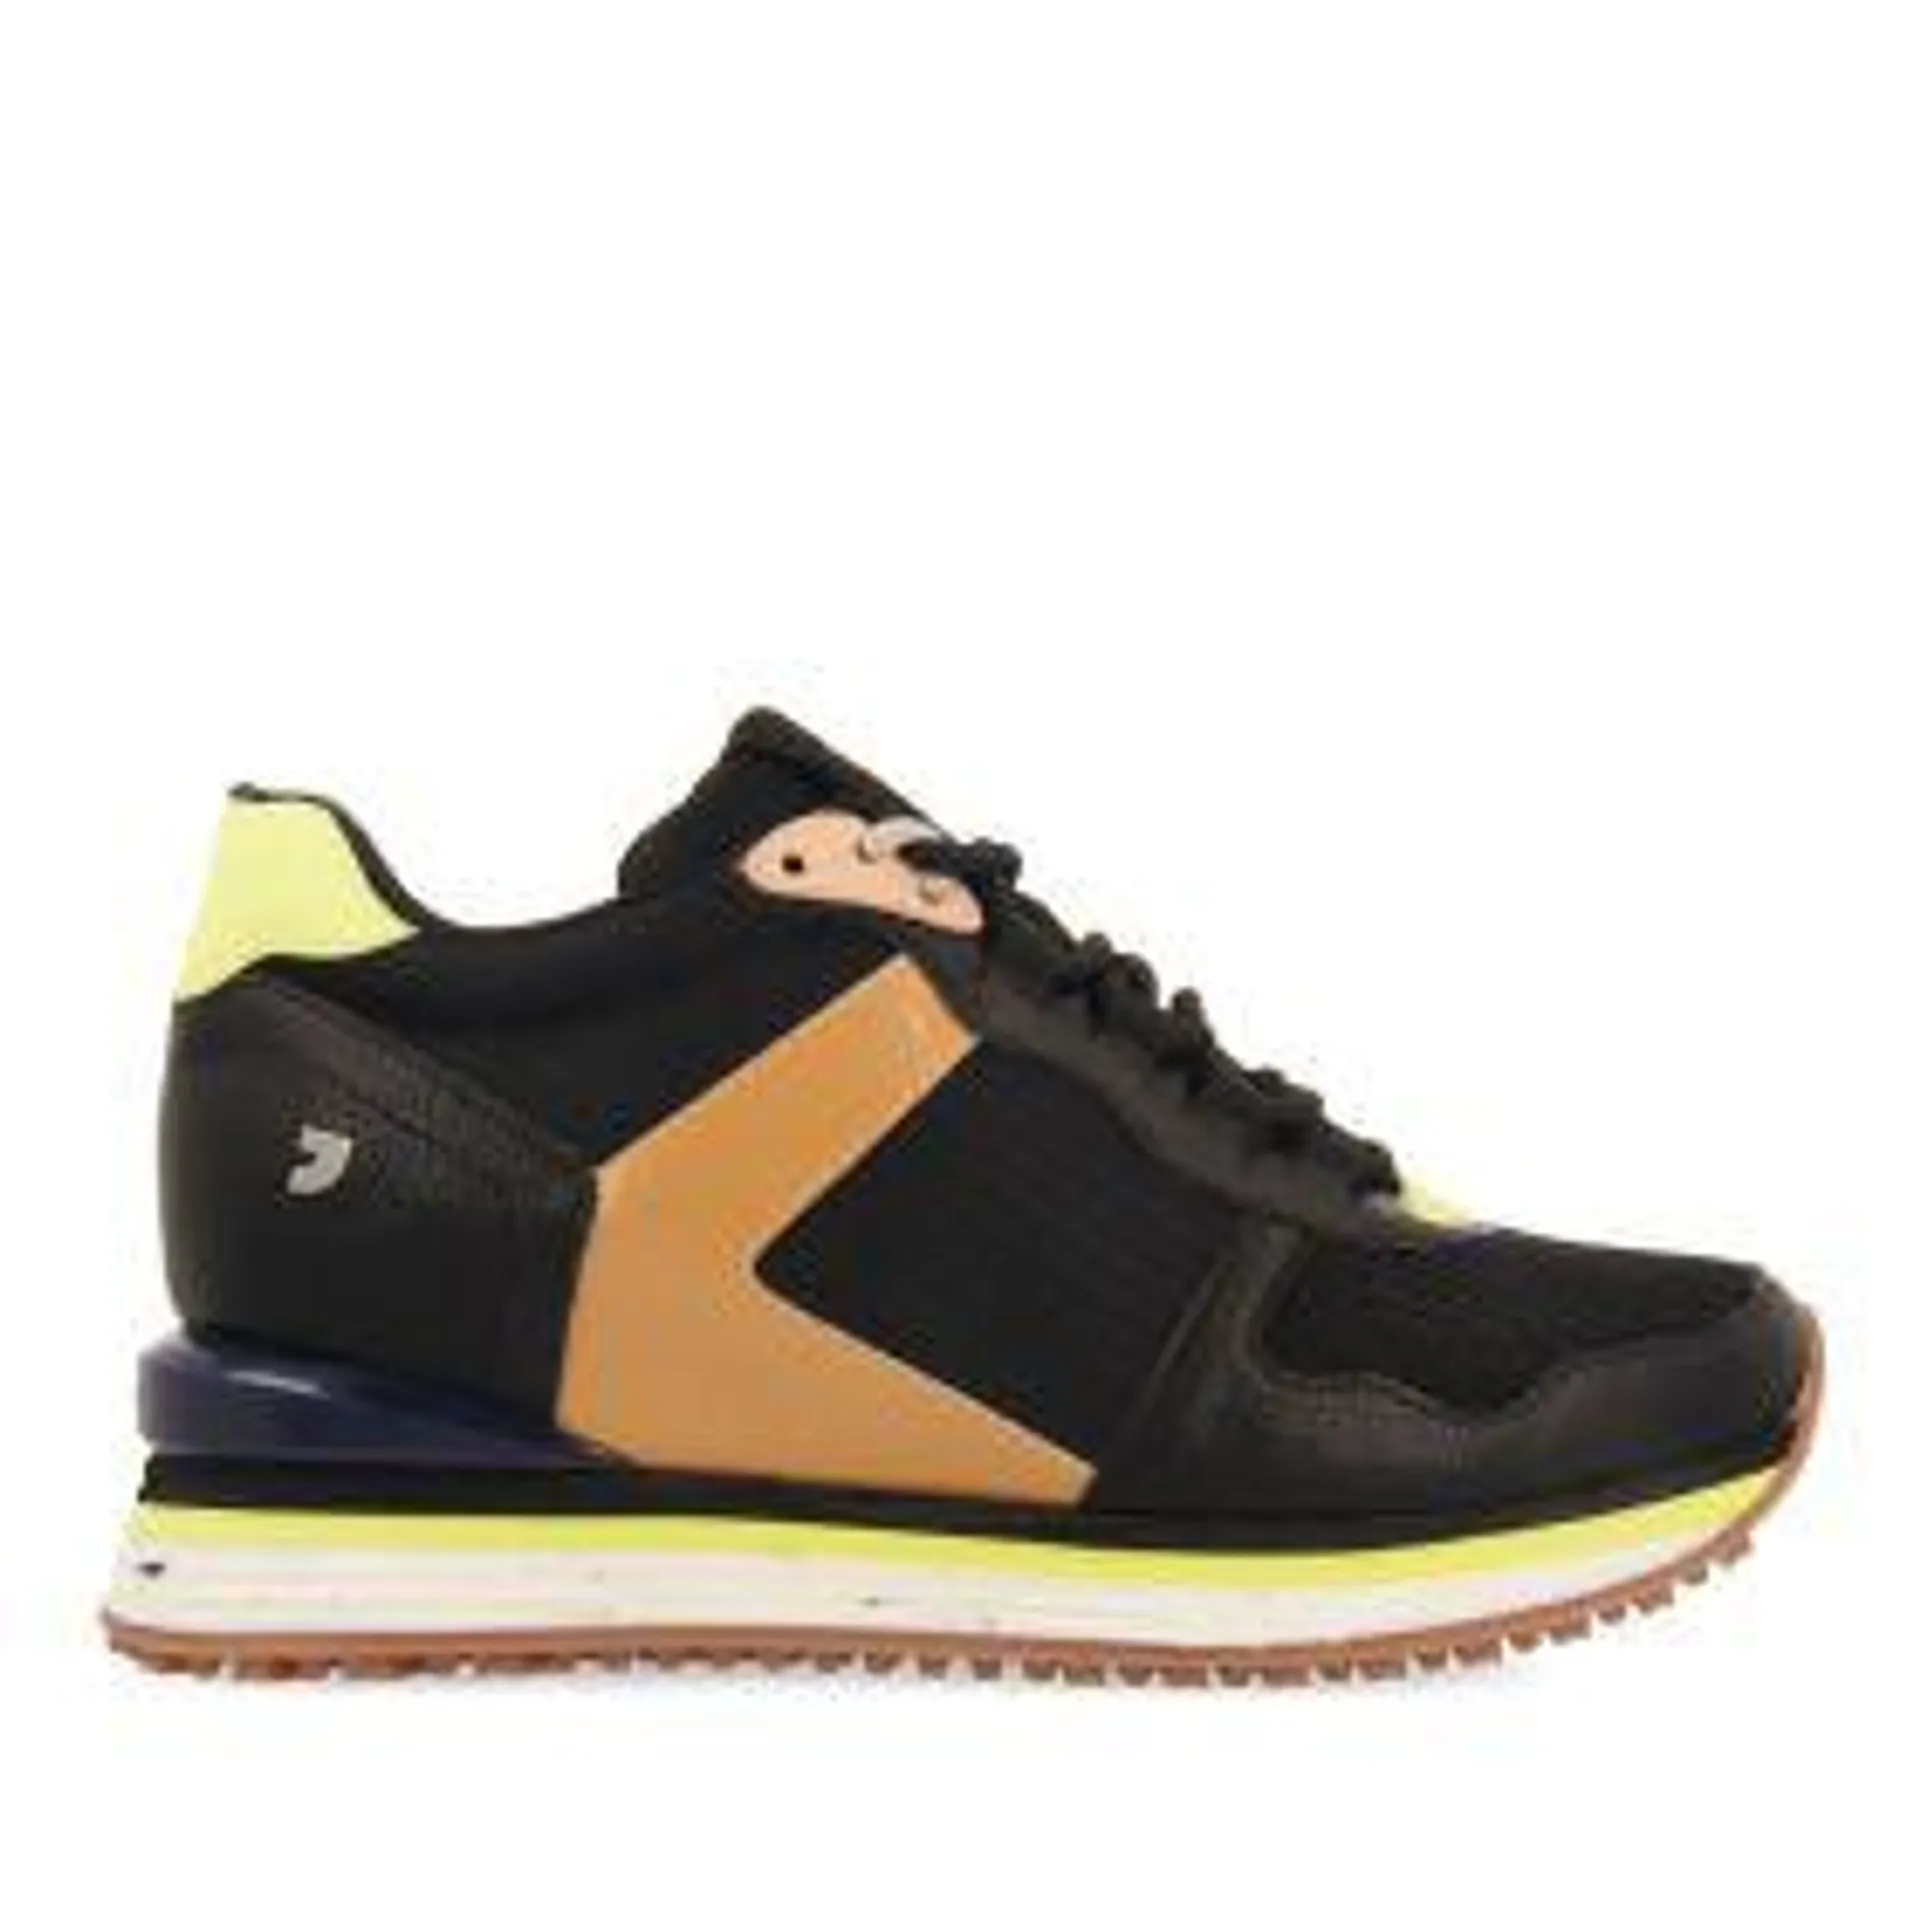 Chiny women's black sneakers with inner wedges and shades of pastel and neon